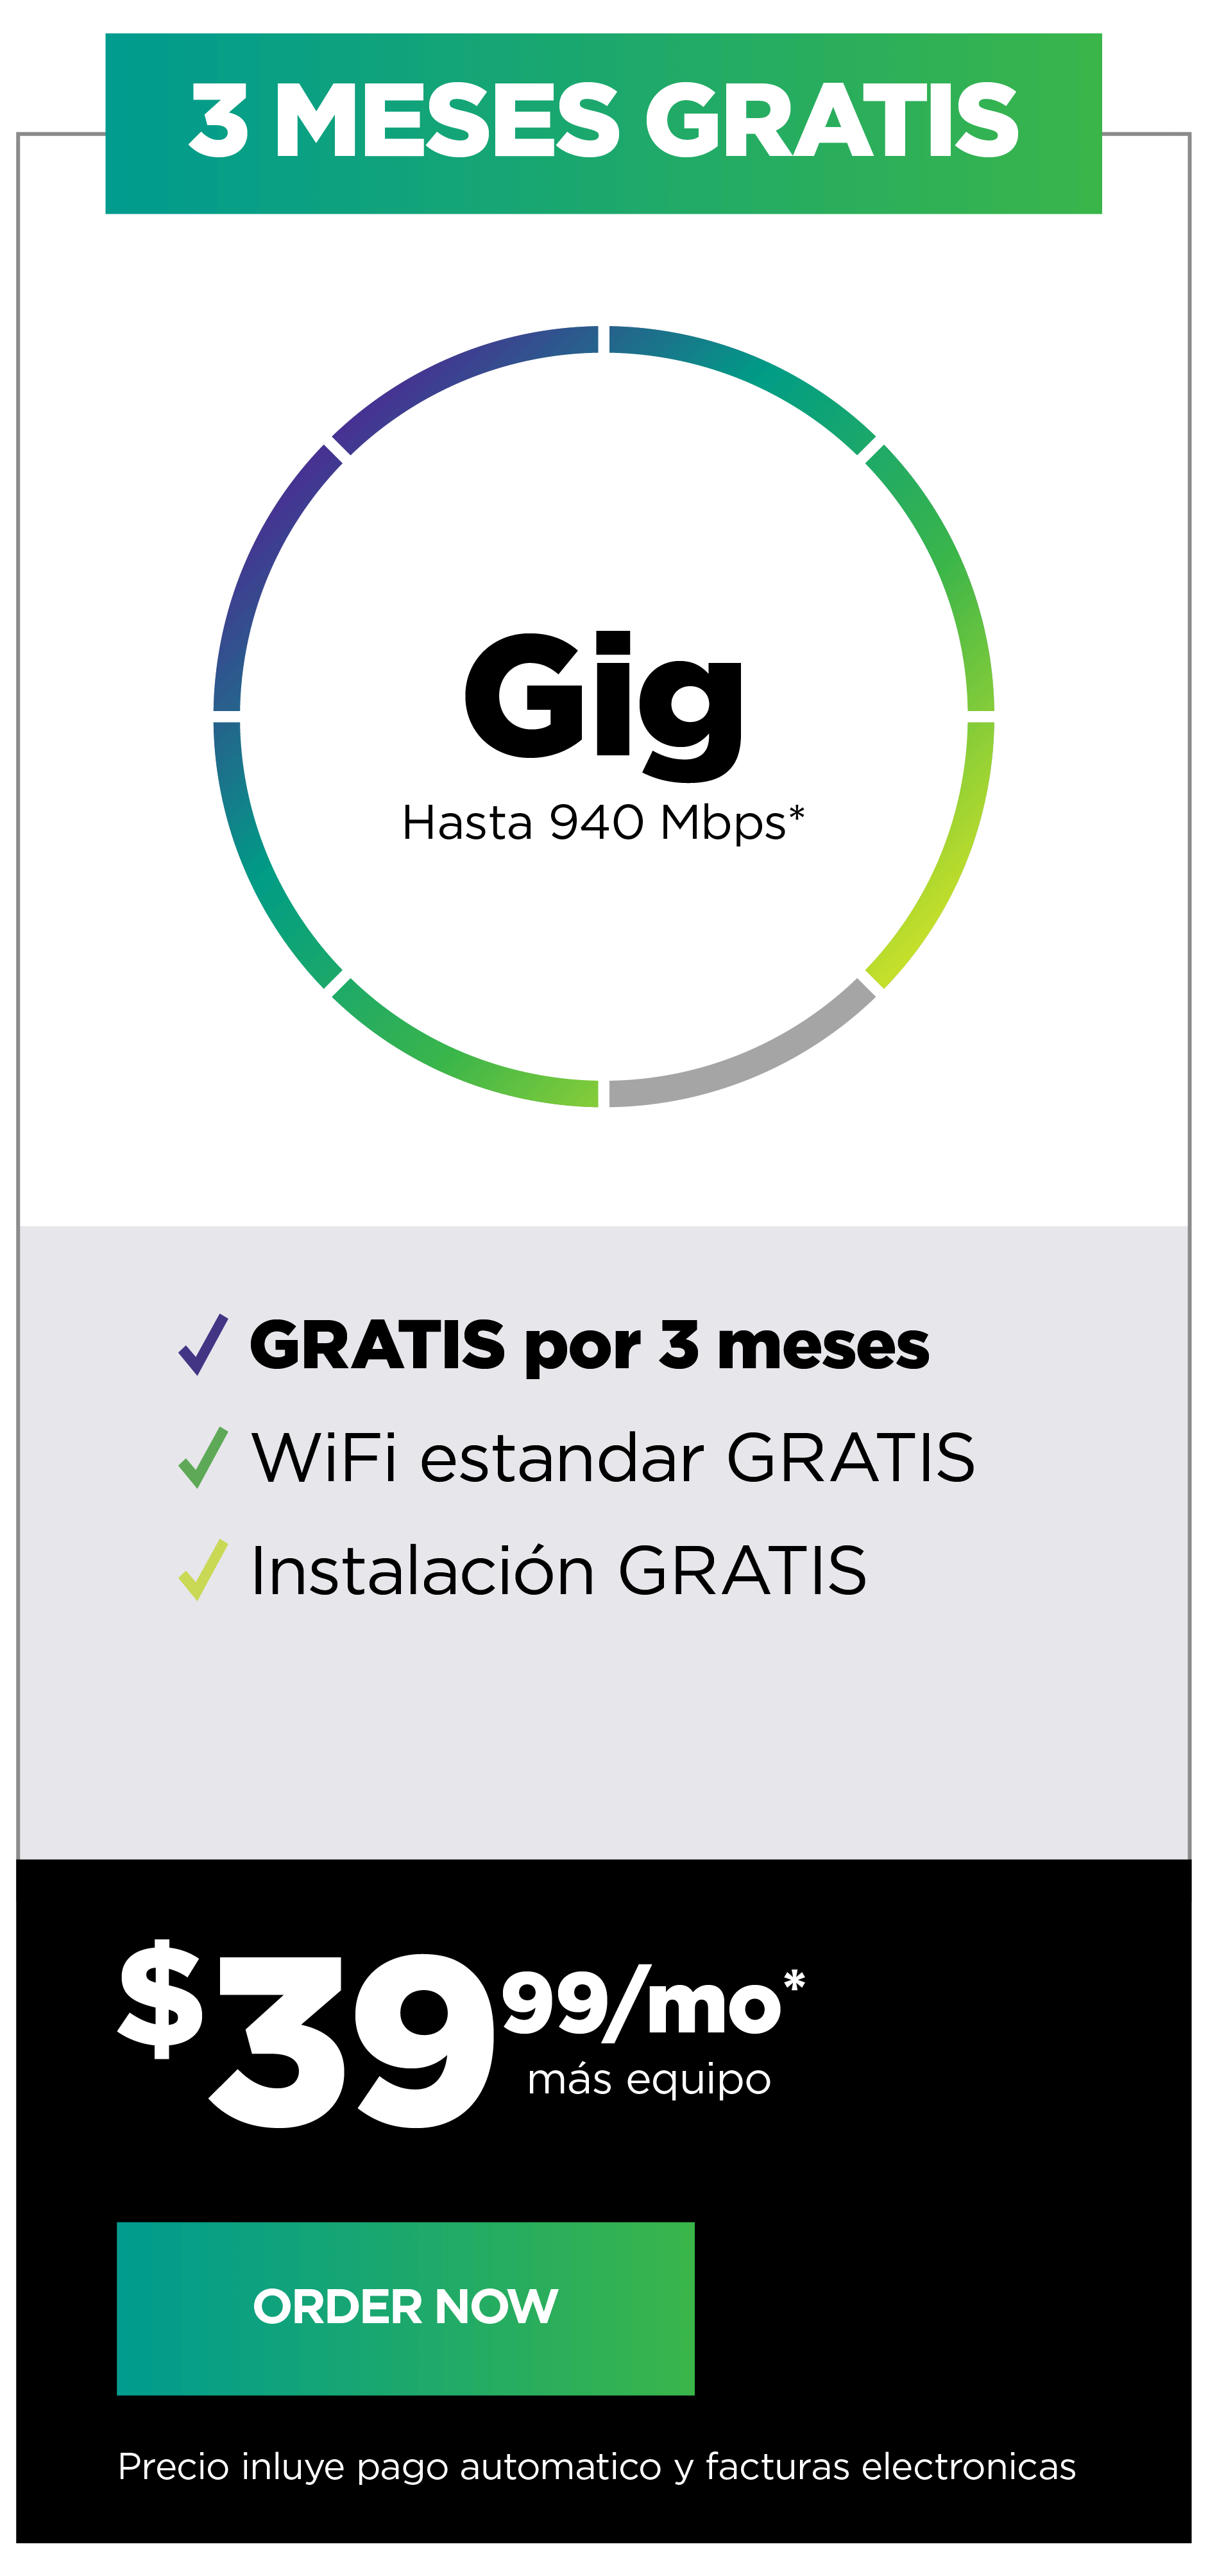 Gig deal in Spanish